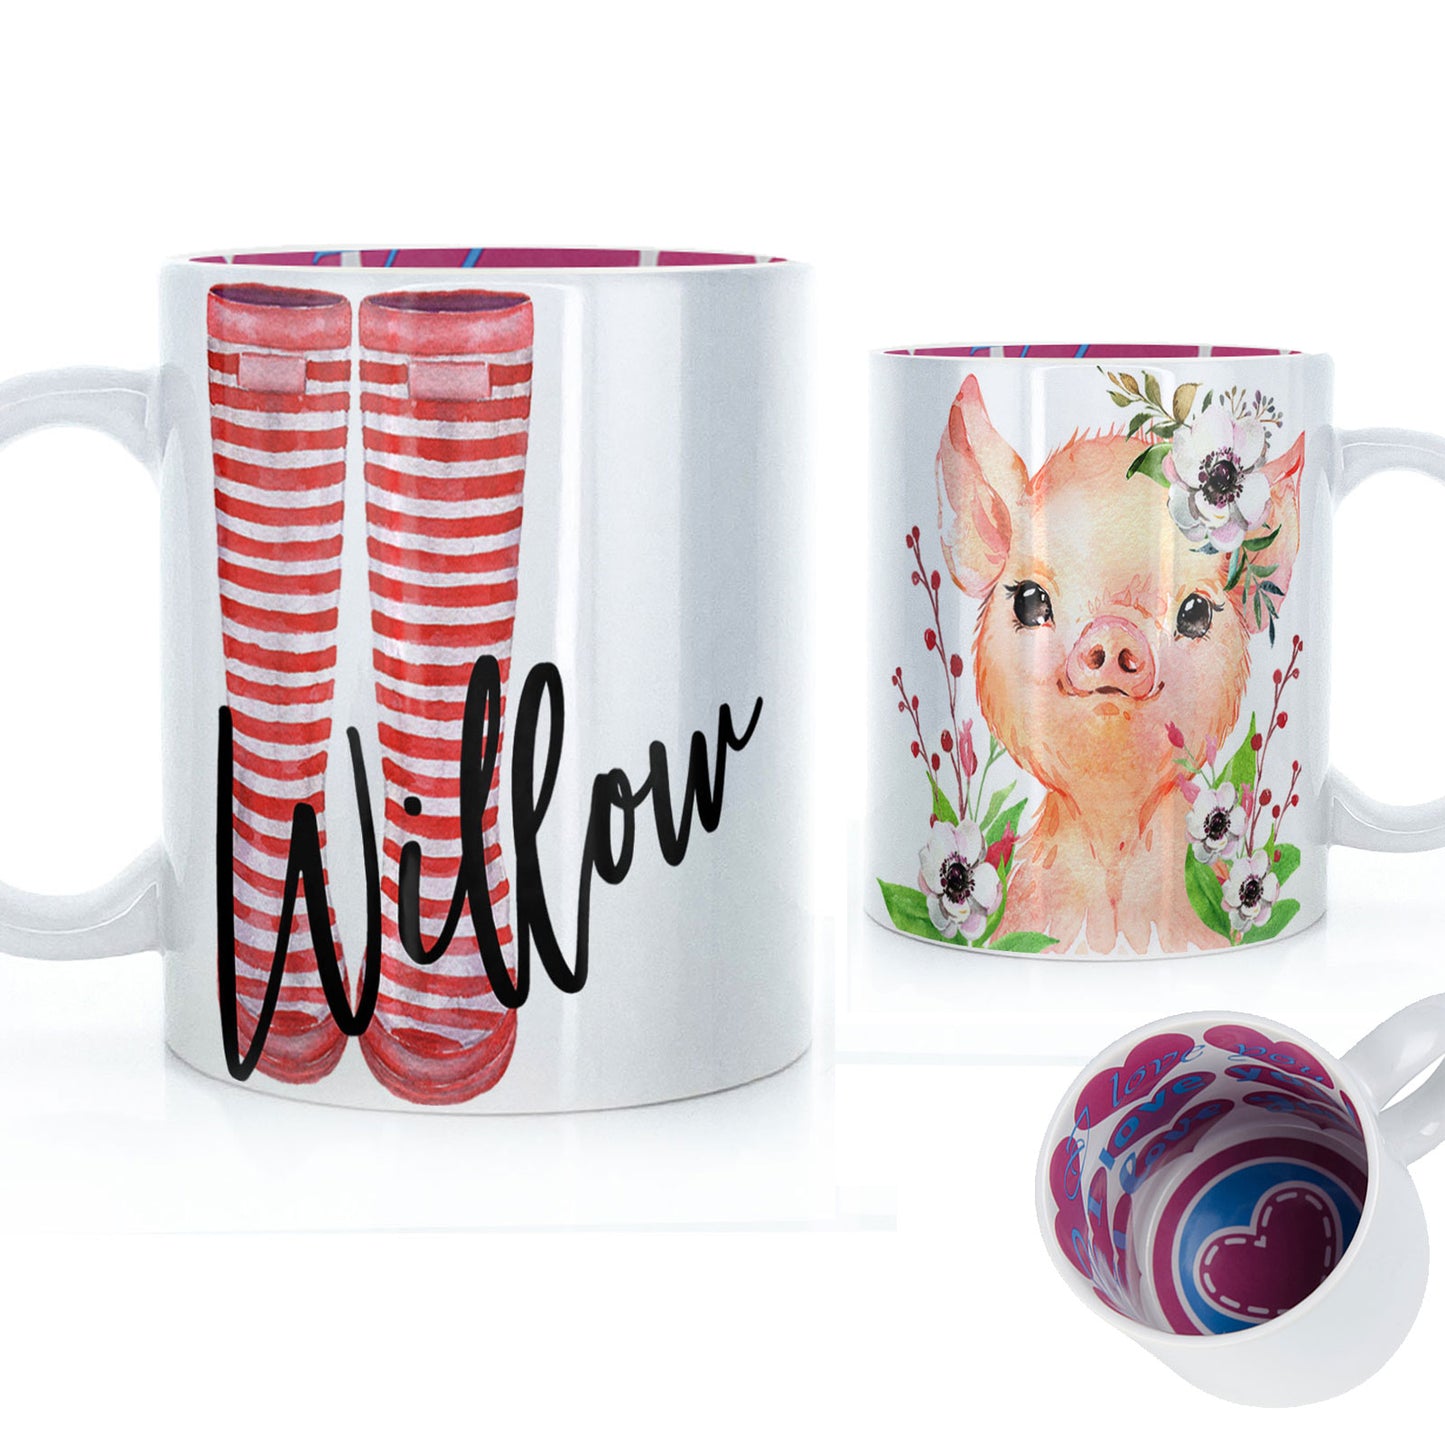 Personalised Mug with Stylish Text and White Flower Pig & Red Striped Wellies